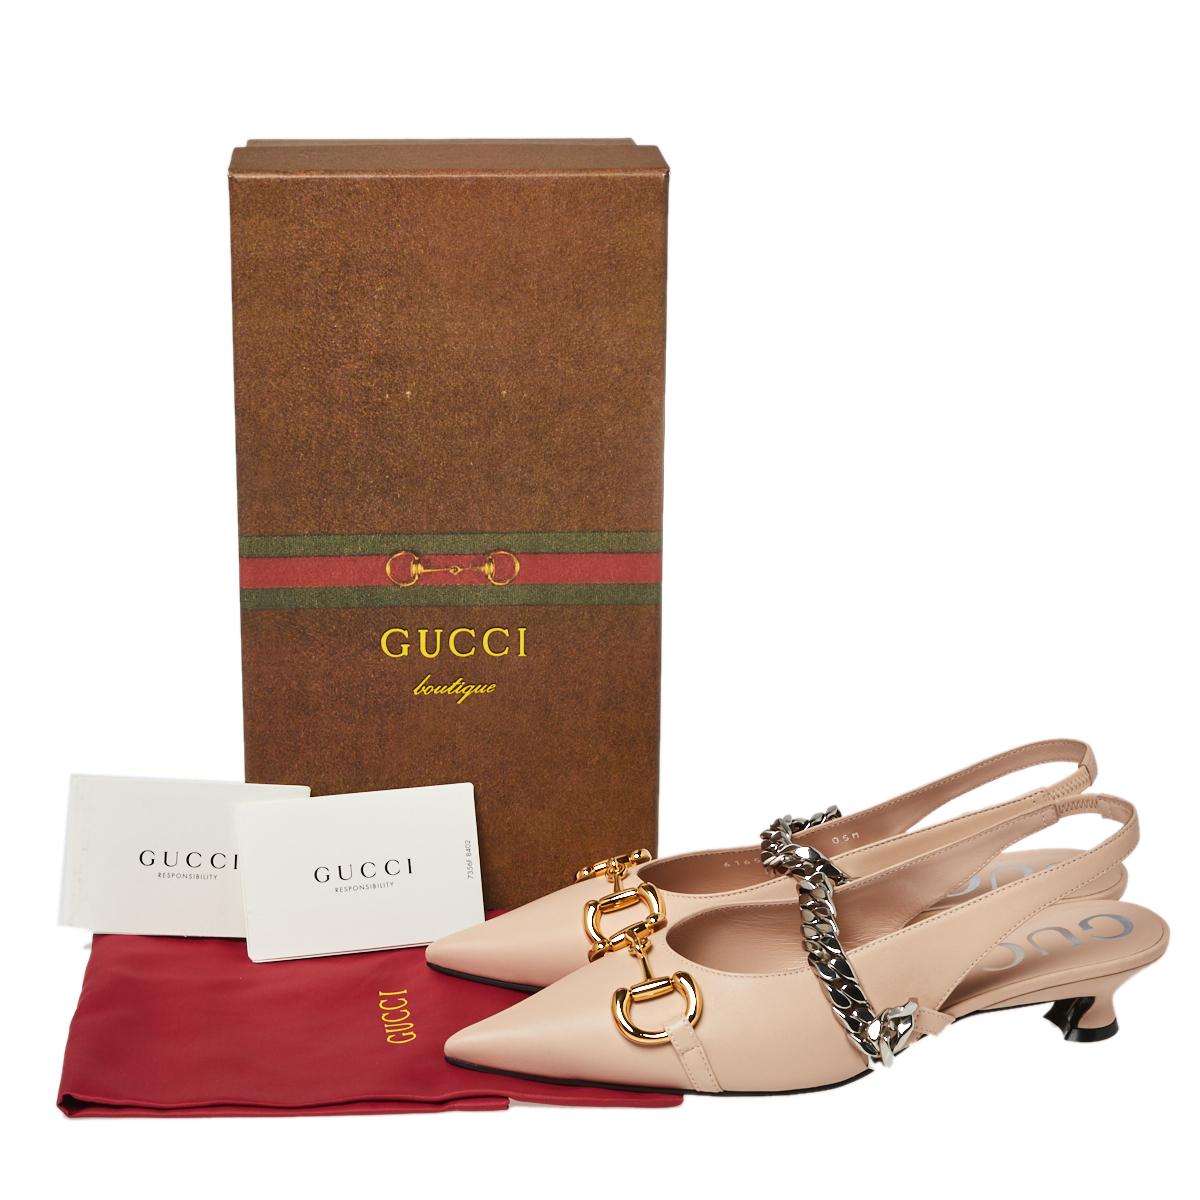 Gucci Beige Leather Horsebit Pointed Toe Slingback Sandals Size 39 4